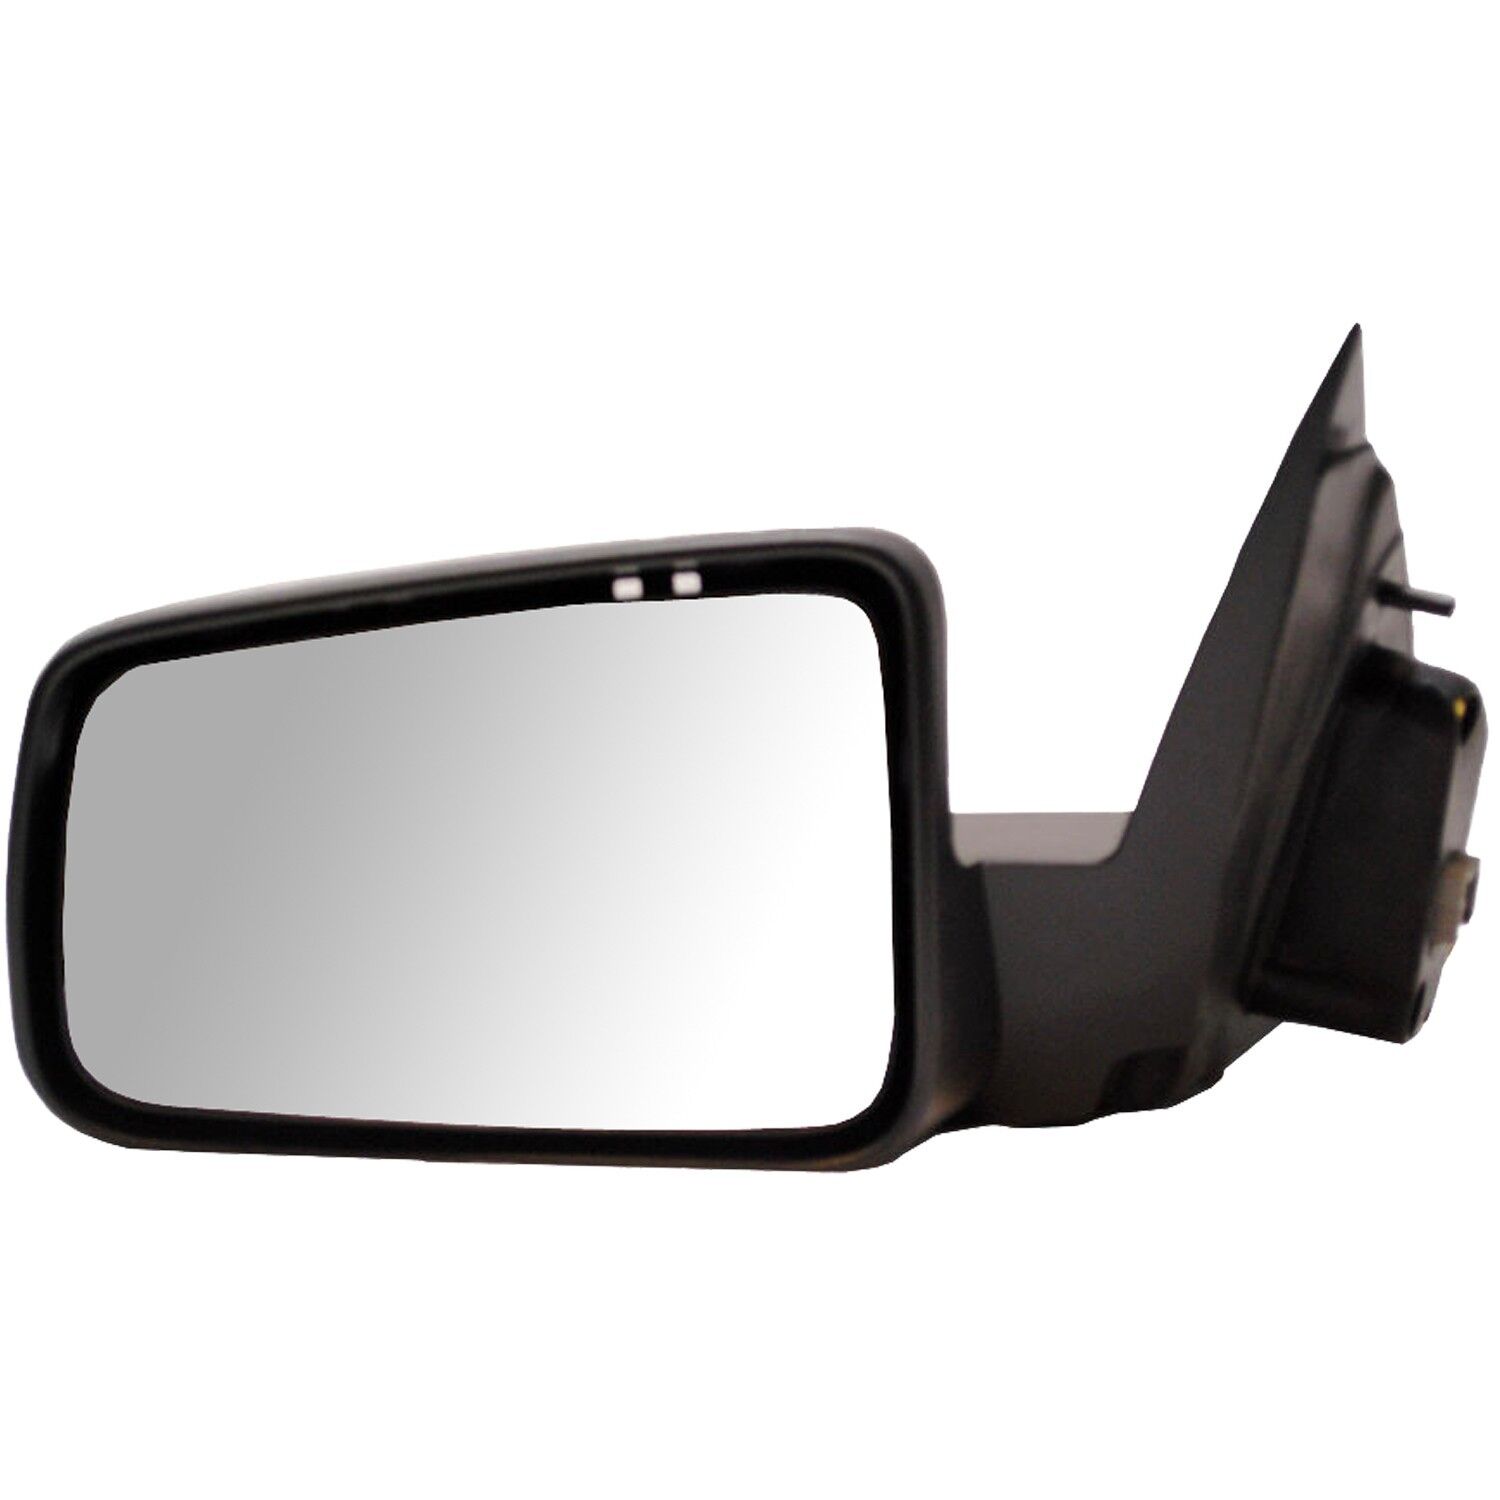 NEW OEM 2008-2011 Ford Focus Standard Power Mirror LEFT, Driver\'s Side